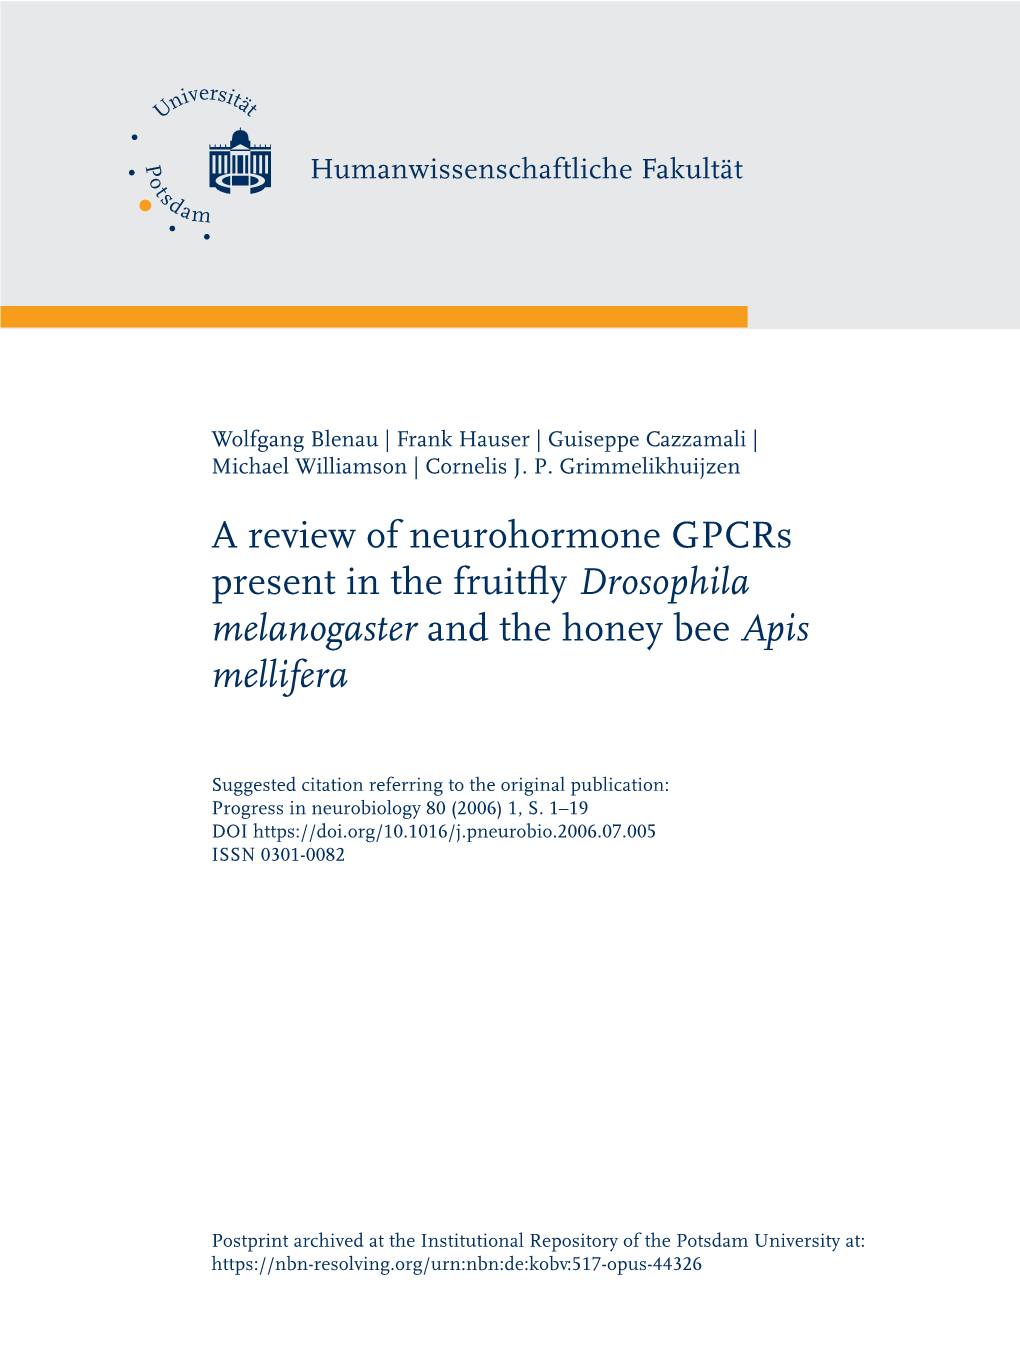 A Review of Neurohormone Gpcrs Present in the Fruitfly Drosophila Melanogaster and the Honey Bee Apis Mellifera